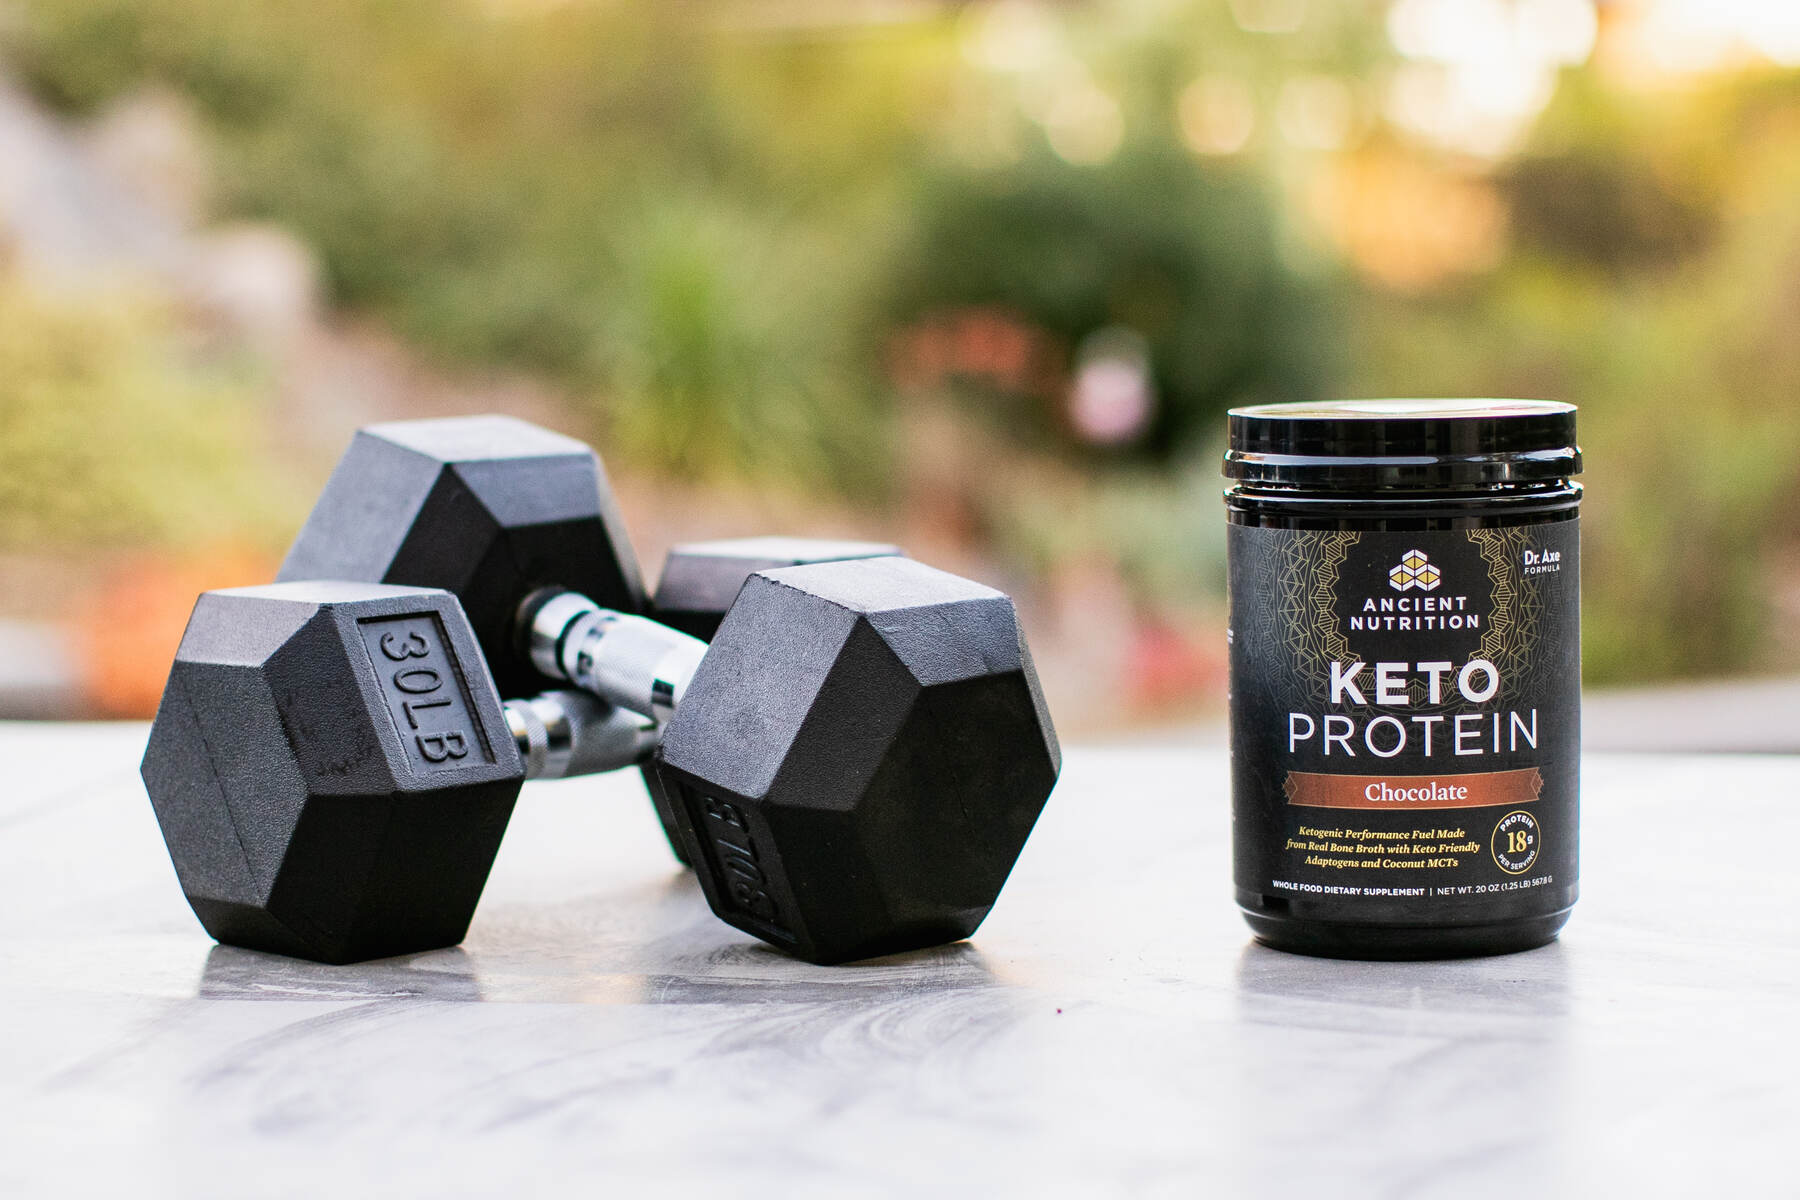 30lb dumbbells on a concreate table next to a container of Ancient Nutrition Keto Protein